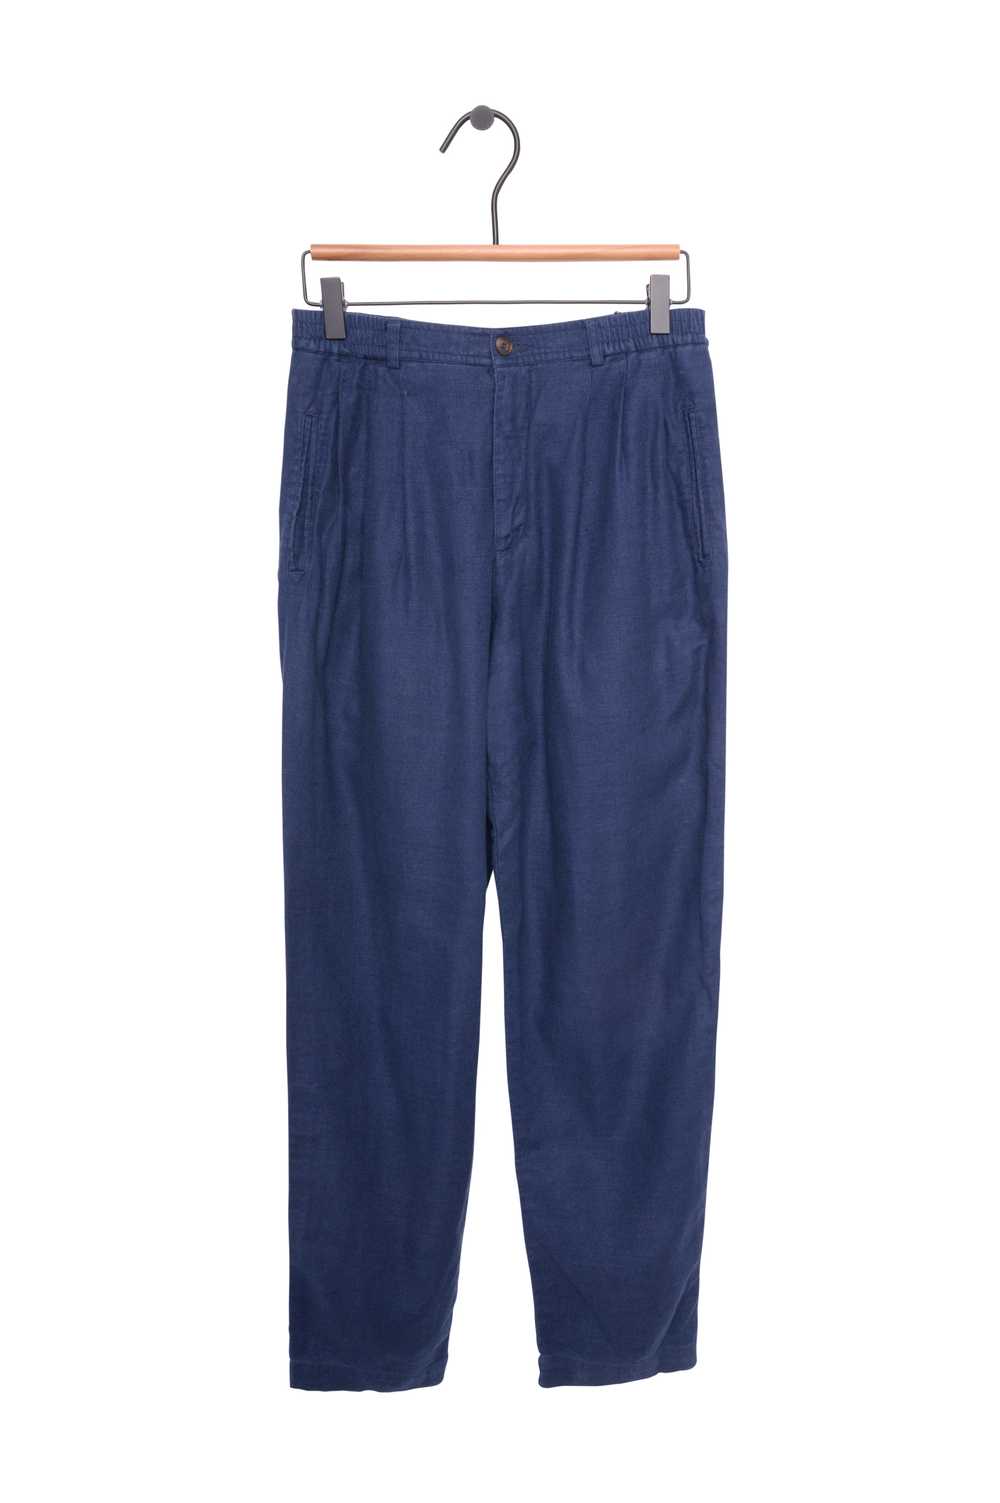 Linen Trousers - image 1